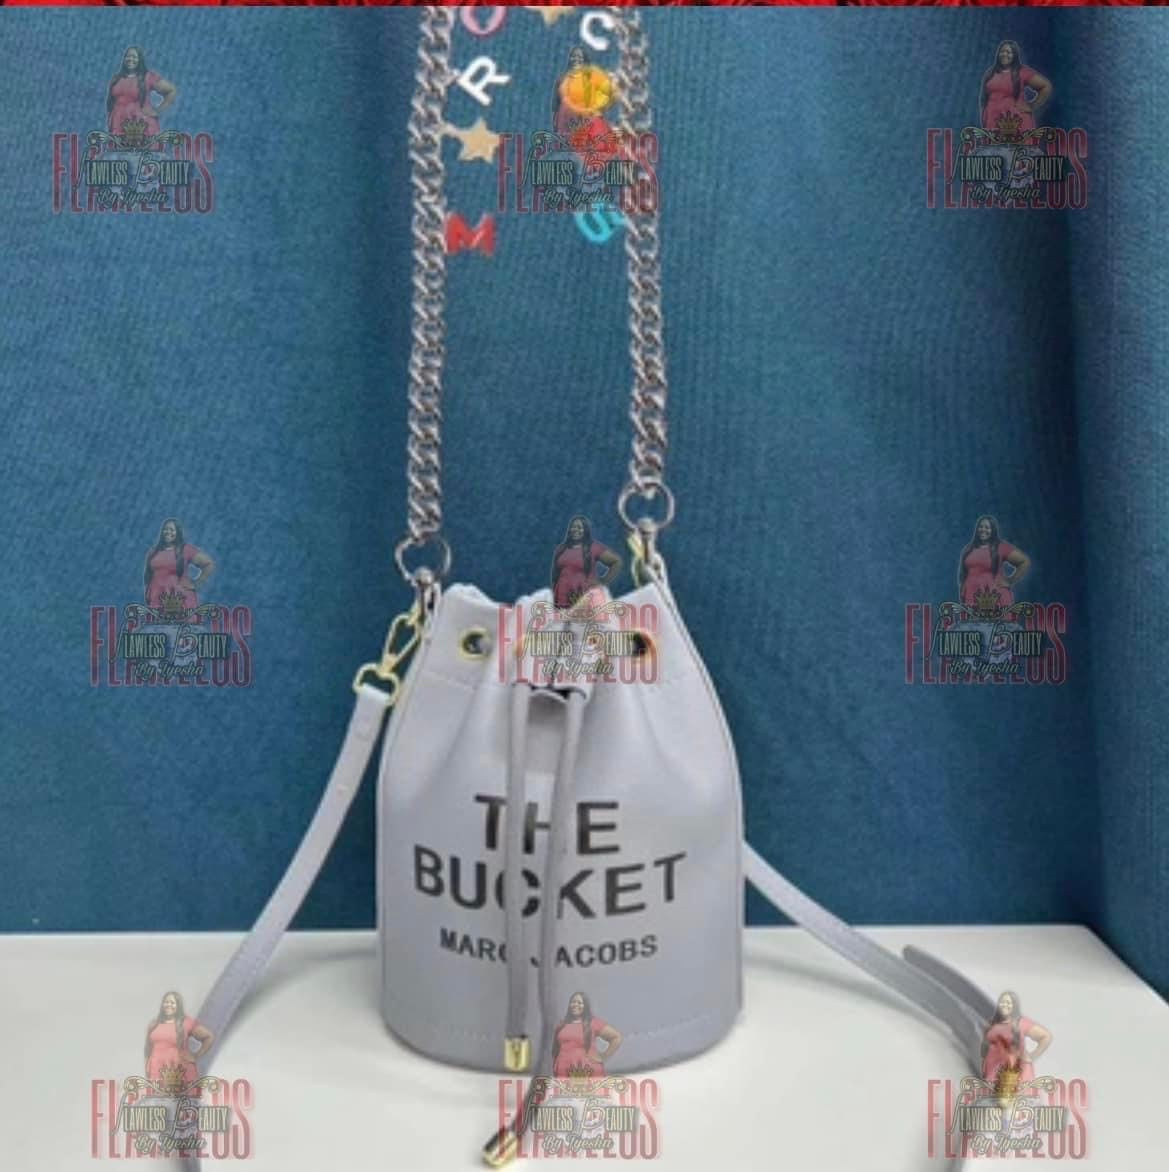 "The Bucket" by Marc Jacobs